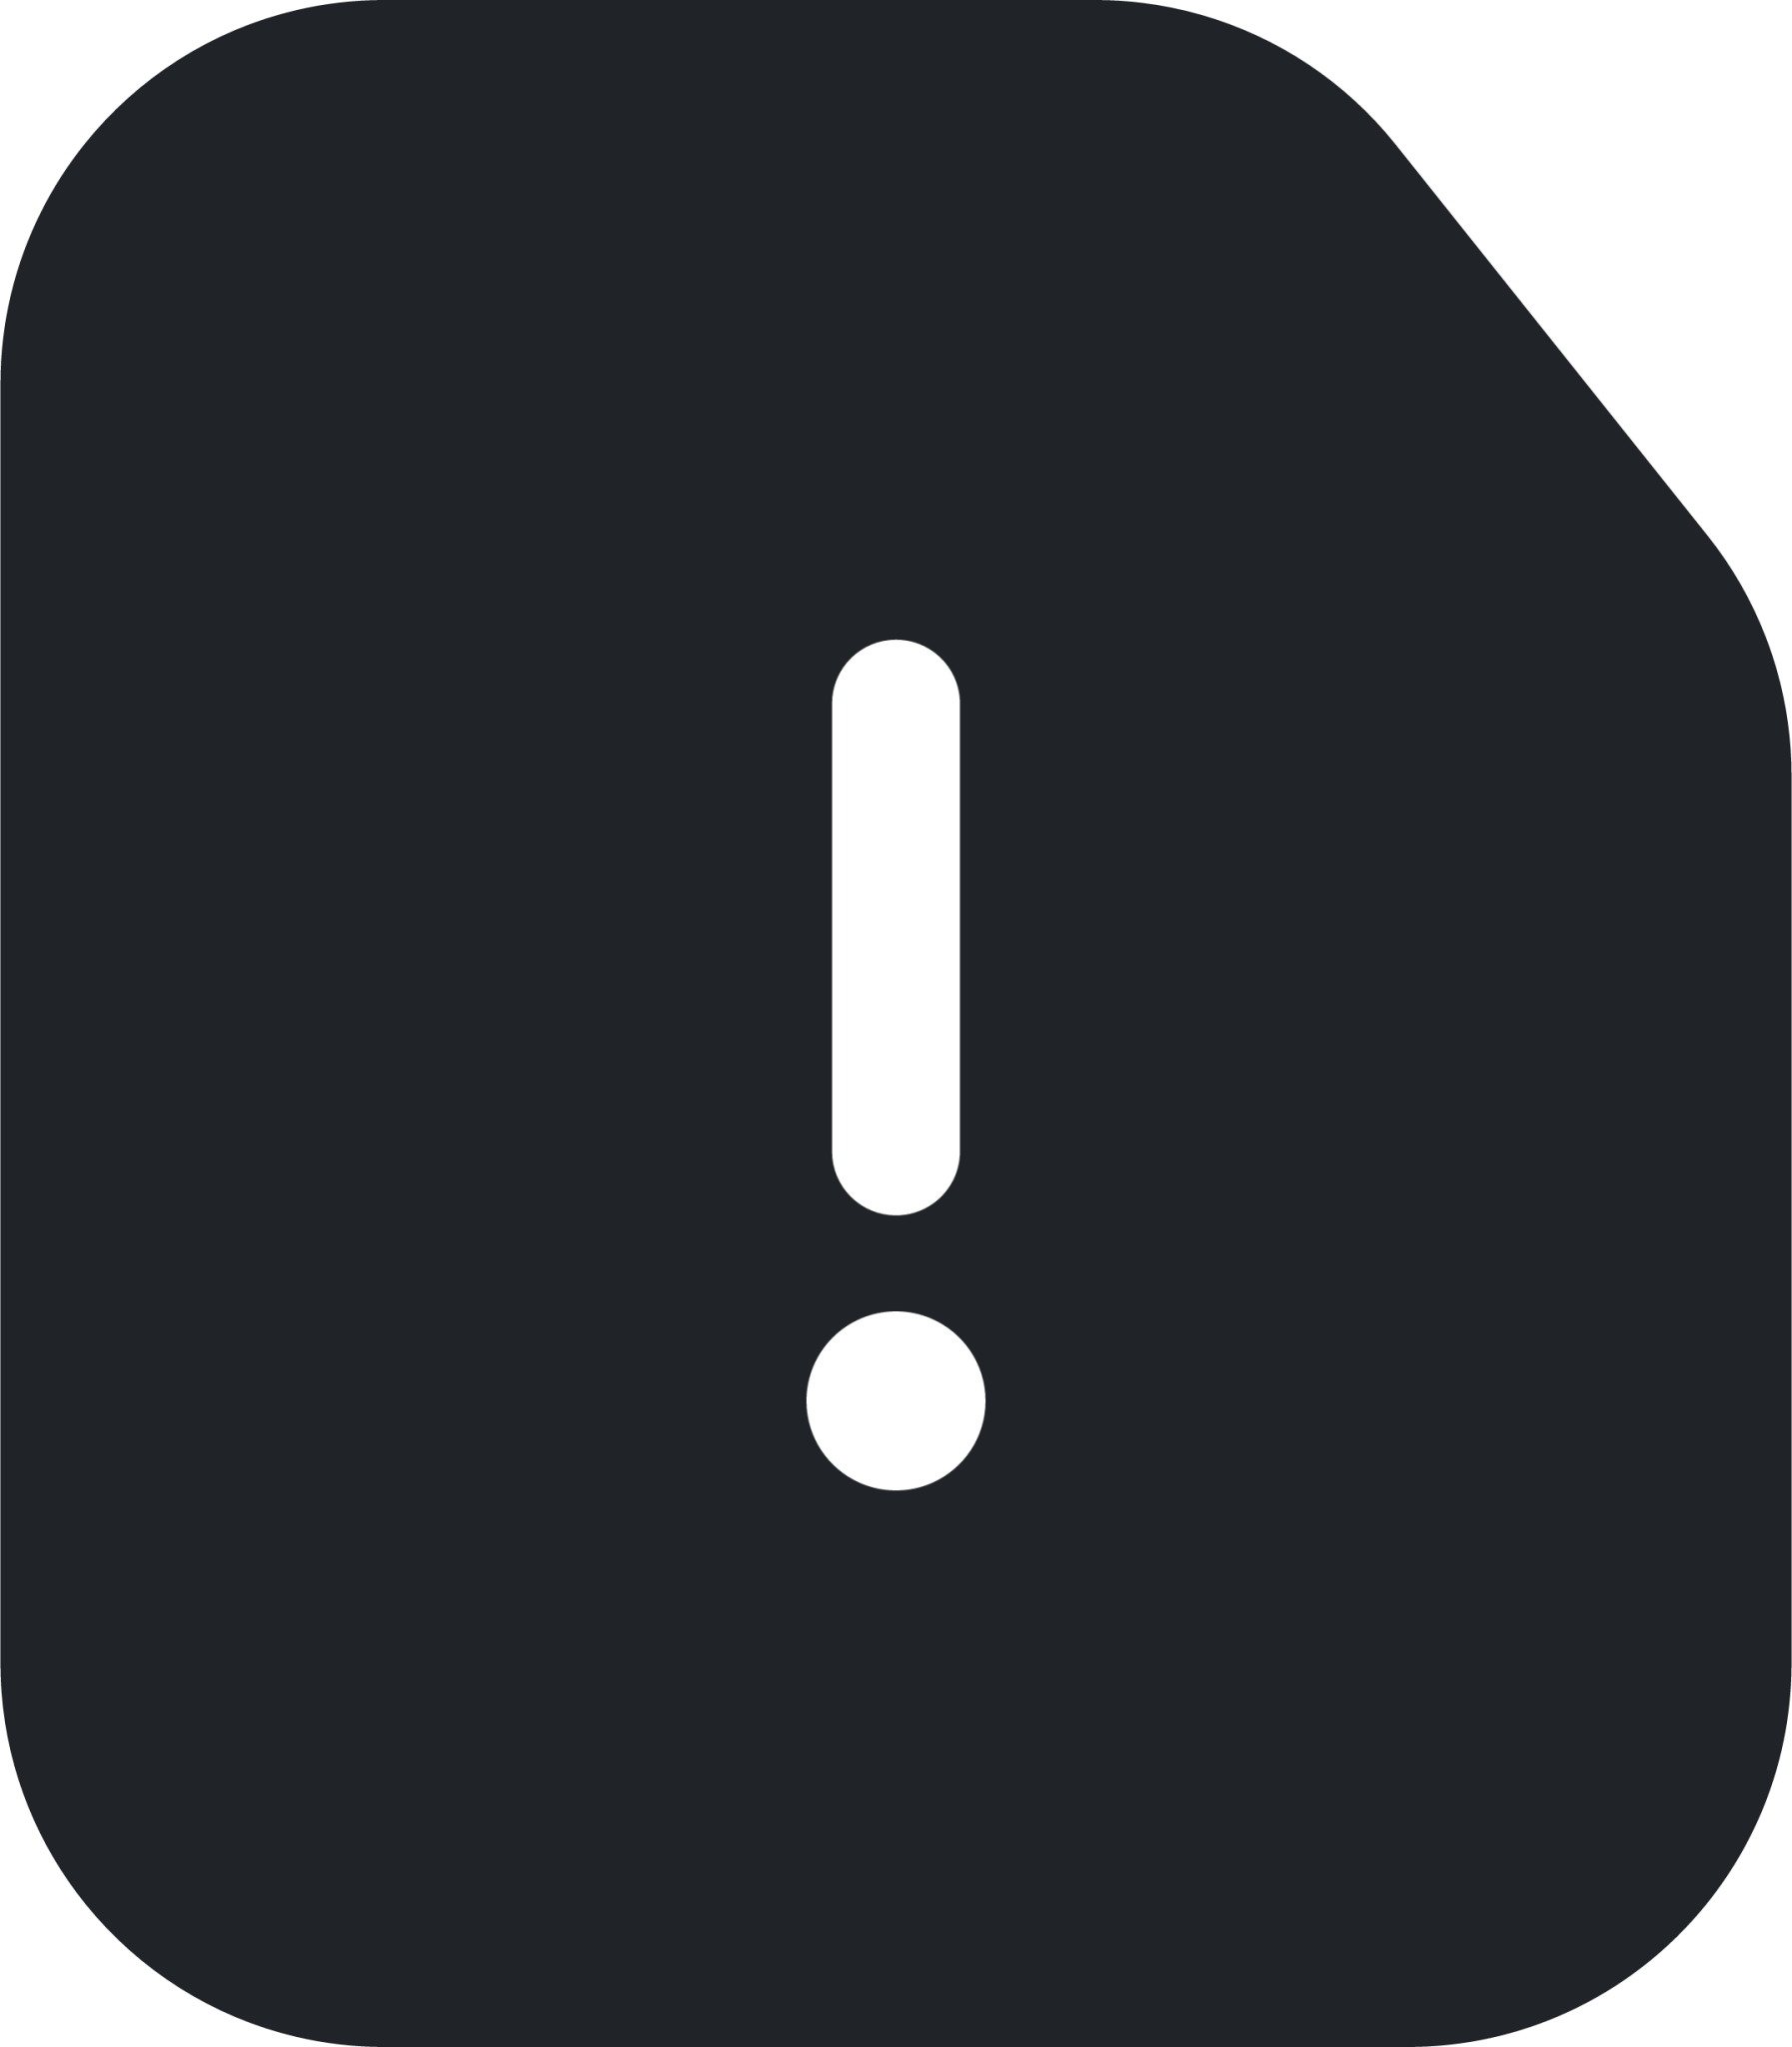 cautionfile (rounded filled) icon